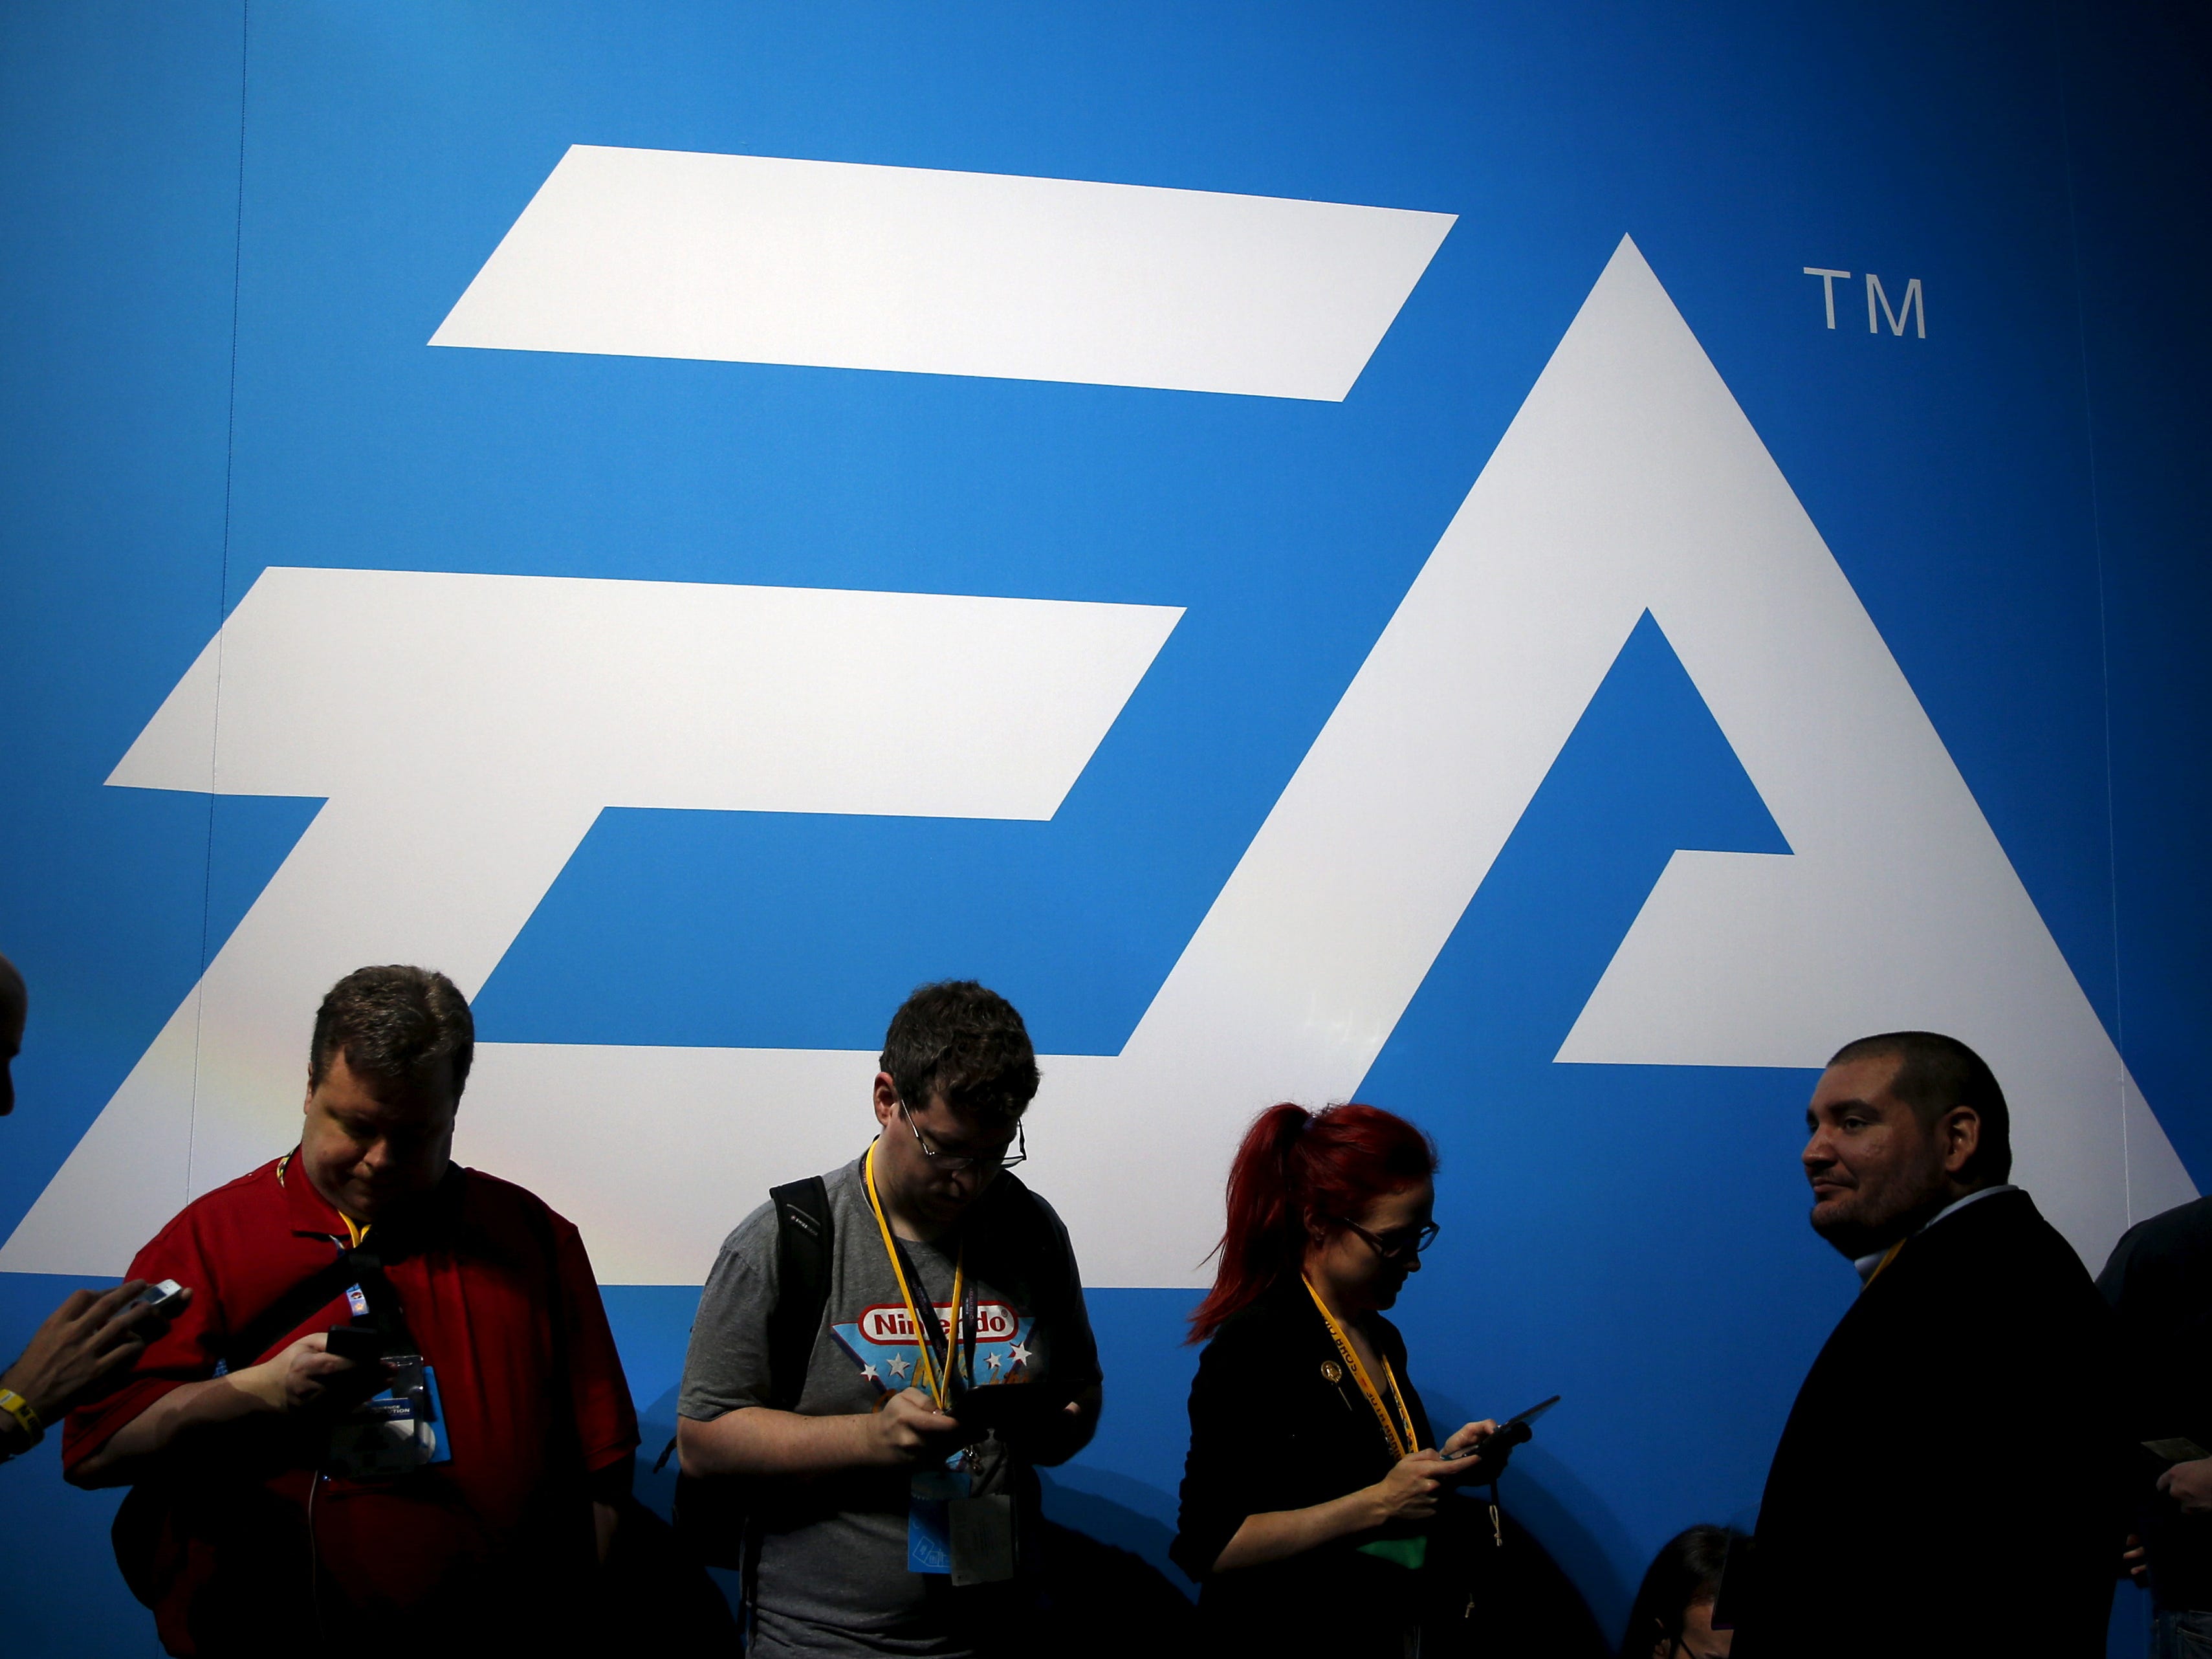 <p>Electronic Arts — the video game company best known for its "The Sims," "FIFA," and "Madden NFL" franchises — is letting go of 6% of its staff, or about 780 employees, the company announced on March 24. </p><p>"As we drive greater focus across our portfolio, we are moving away from projects that do not contribute to our strategy, reviewing our real estate footprint, and restructuring some of our teams," Electronic Arts CEO Andrew Wilson <a href="https://www.ea.com/news/update-to-our-business-march-2023">wrote in a blog post</a> to staffers. </p><p>Wilson said the cuts began early this quarter and will continue through the beginning of the next fiscal year. </p>